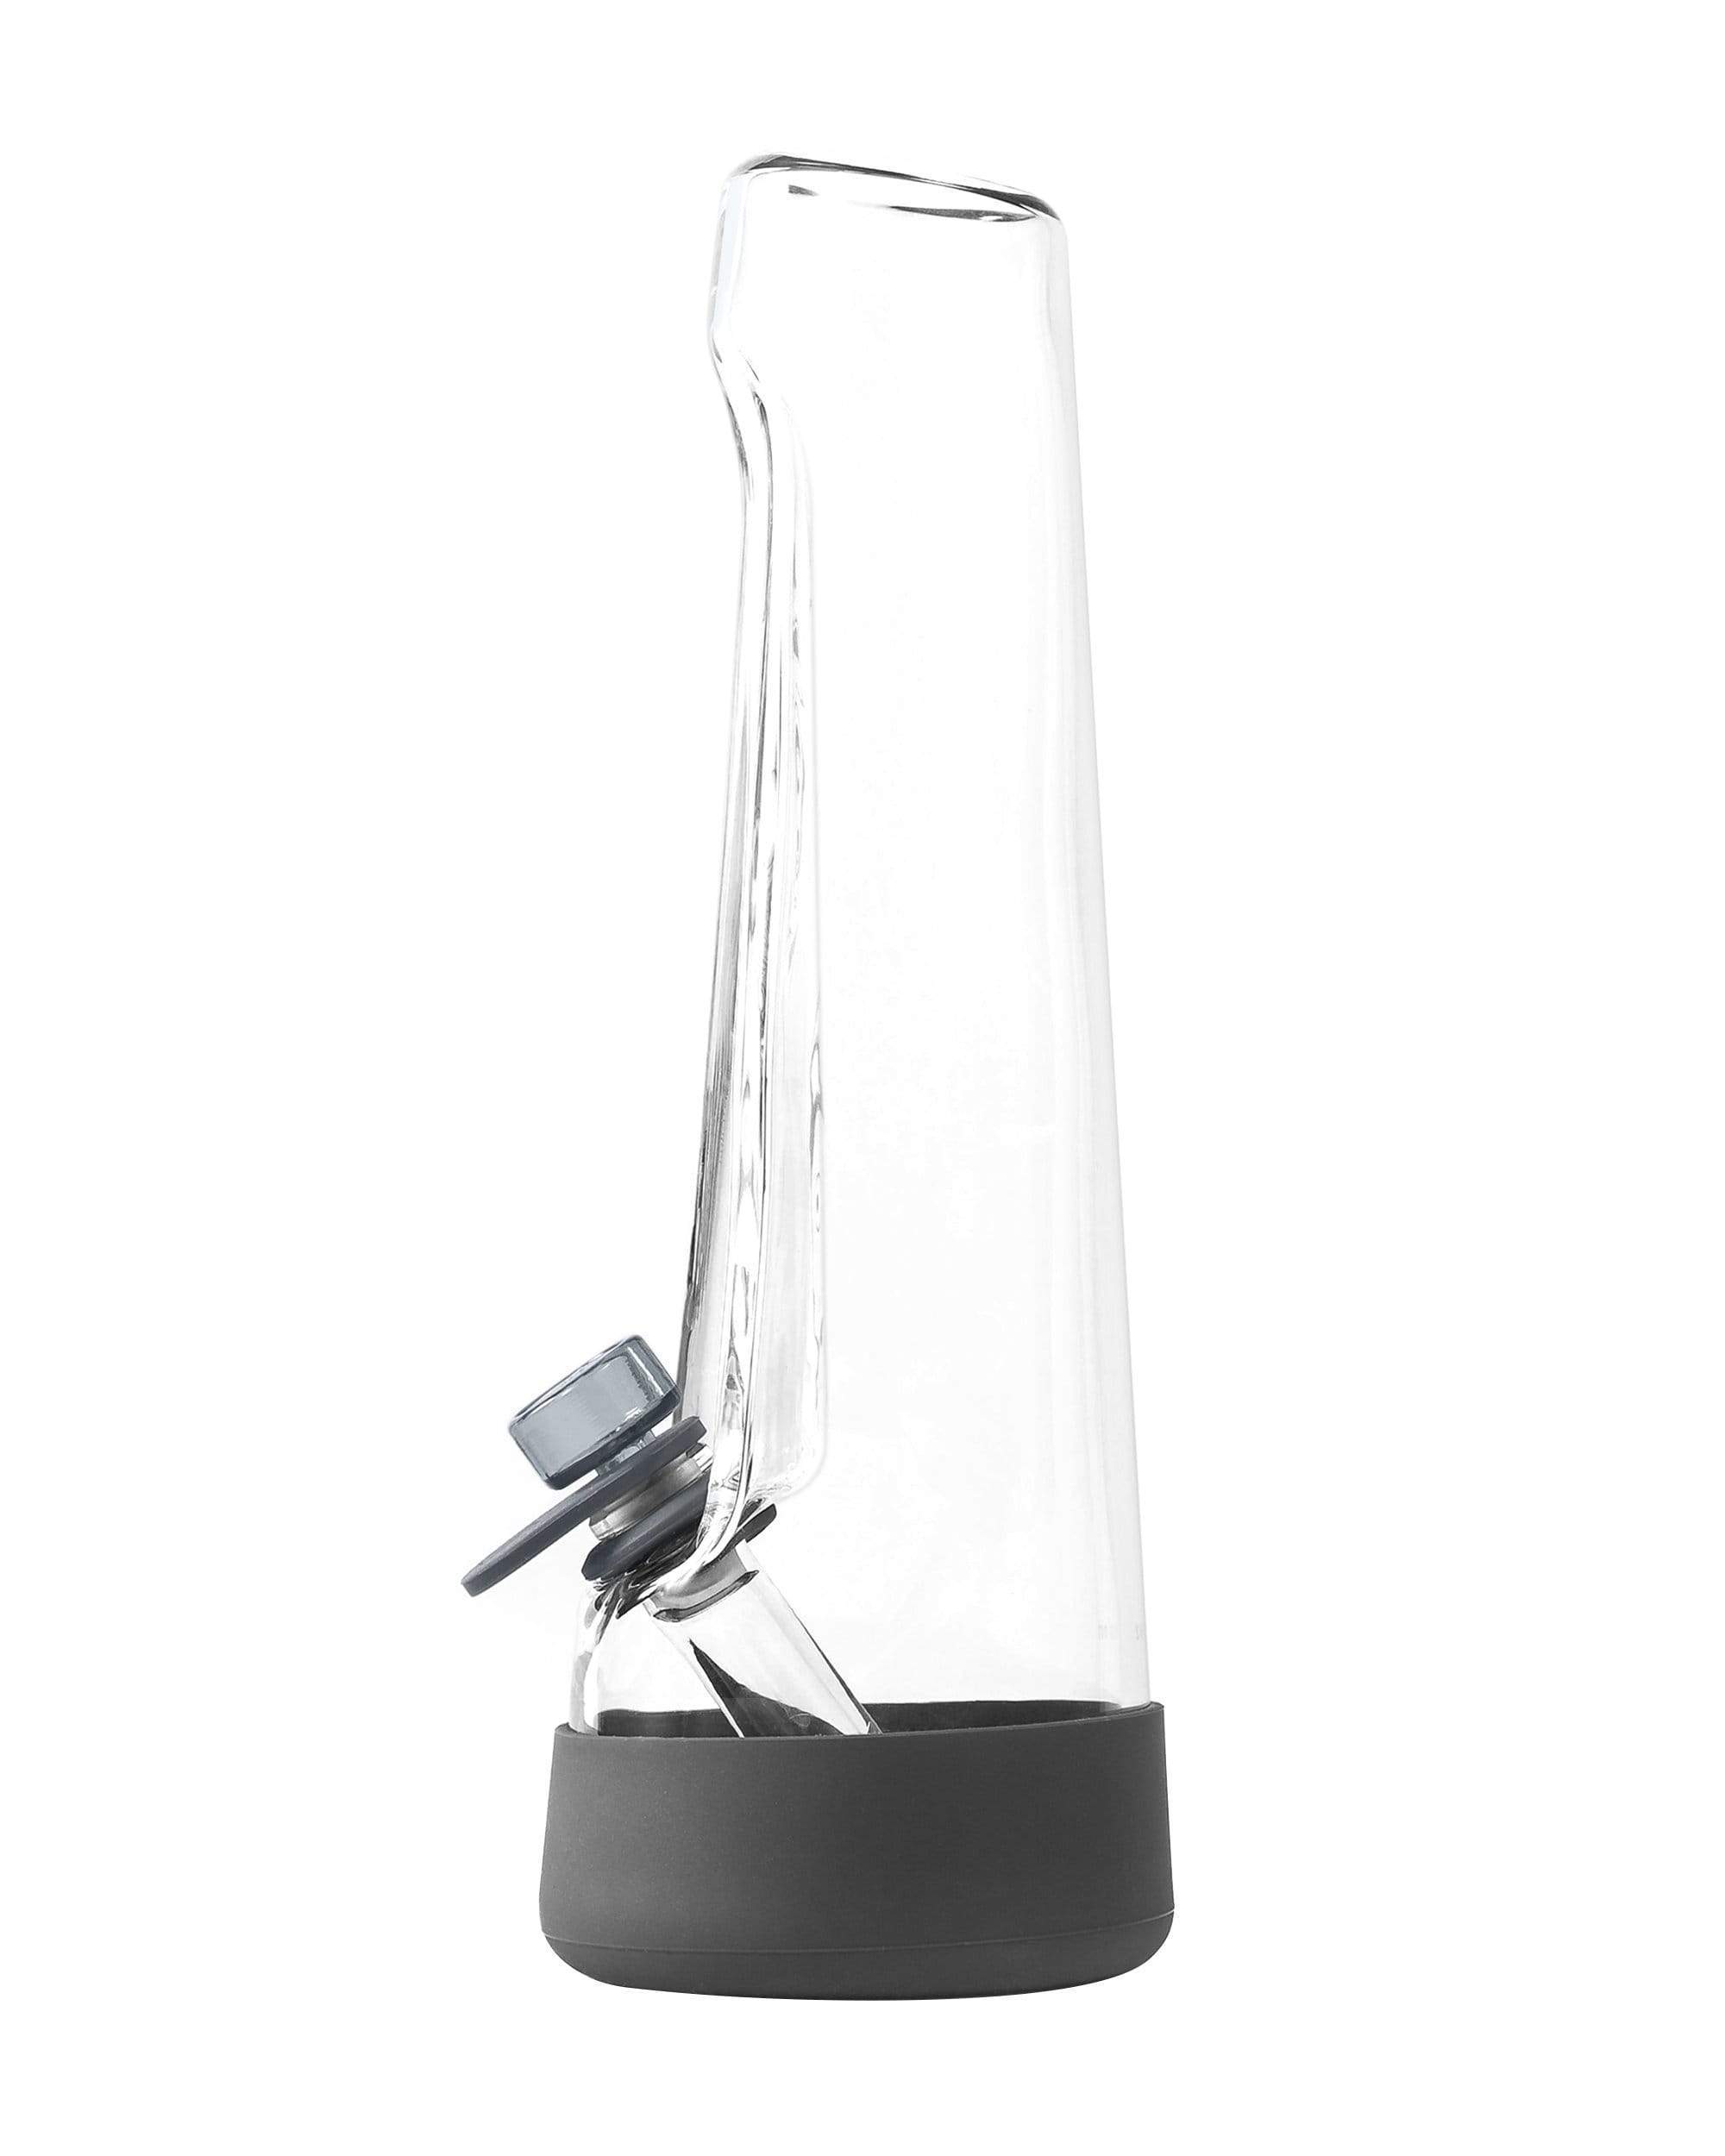 session goods 10 bong charcoal bong ses bng char 14570894491722